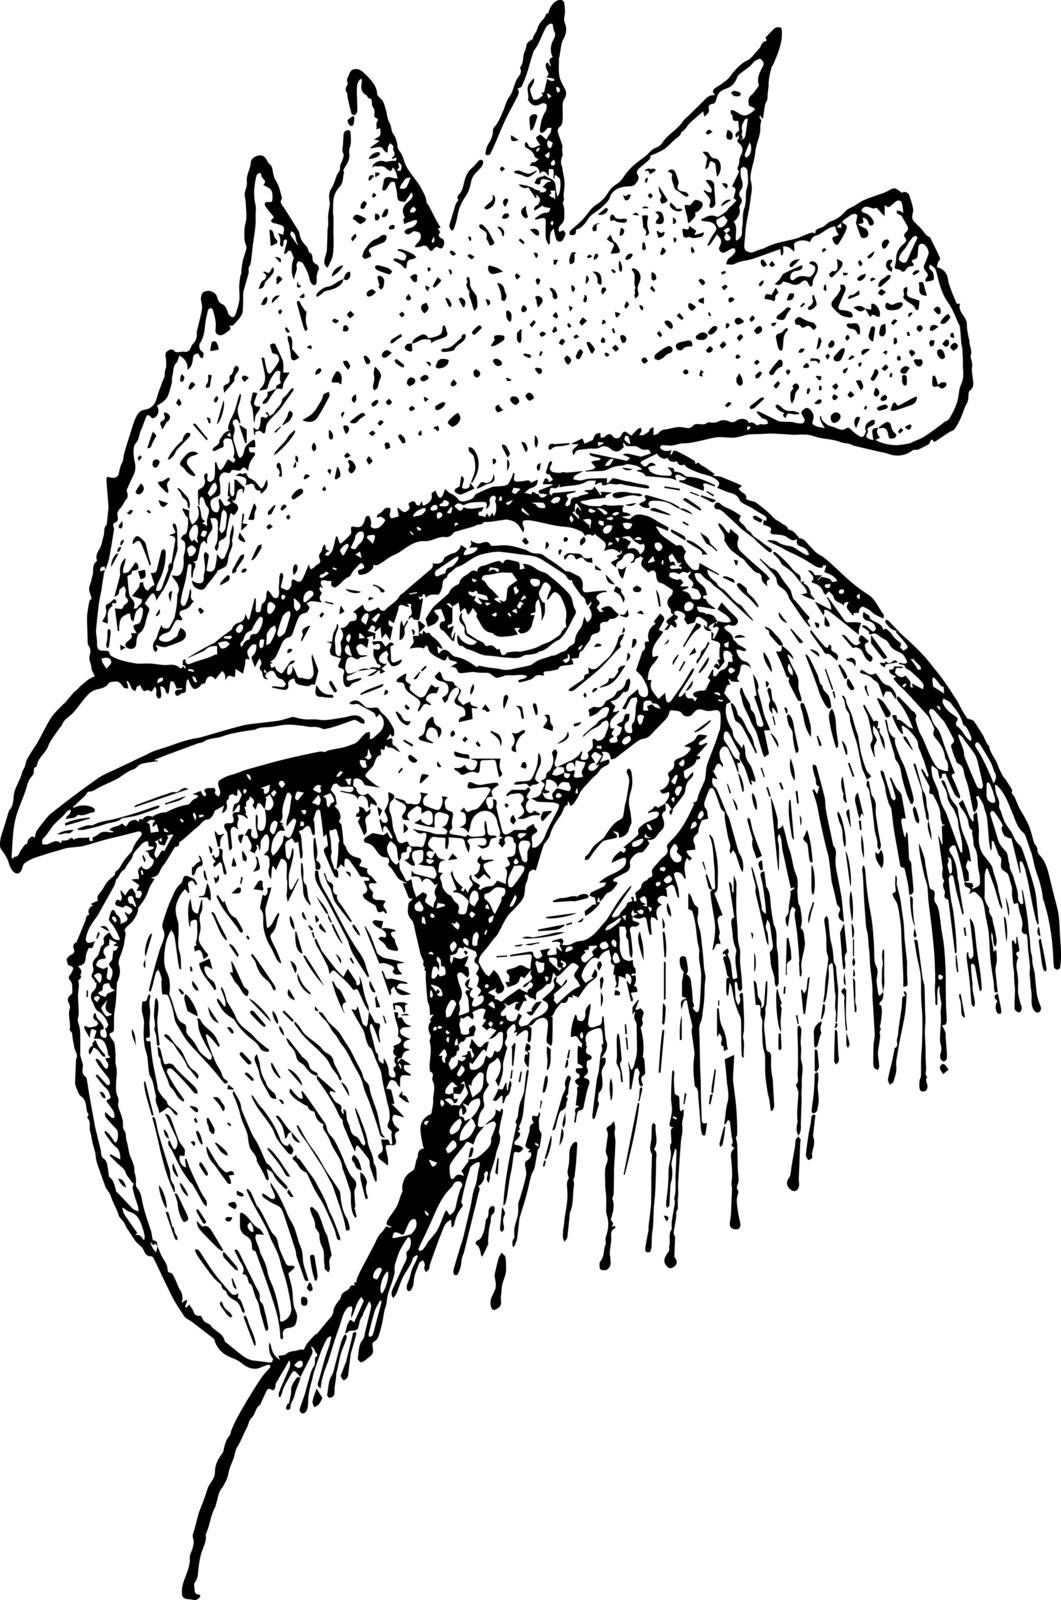 Single Comb Chicken Head which is smooth and standing on the head vintage line drawing or engraving illustration.